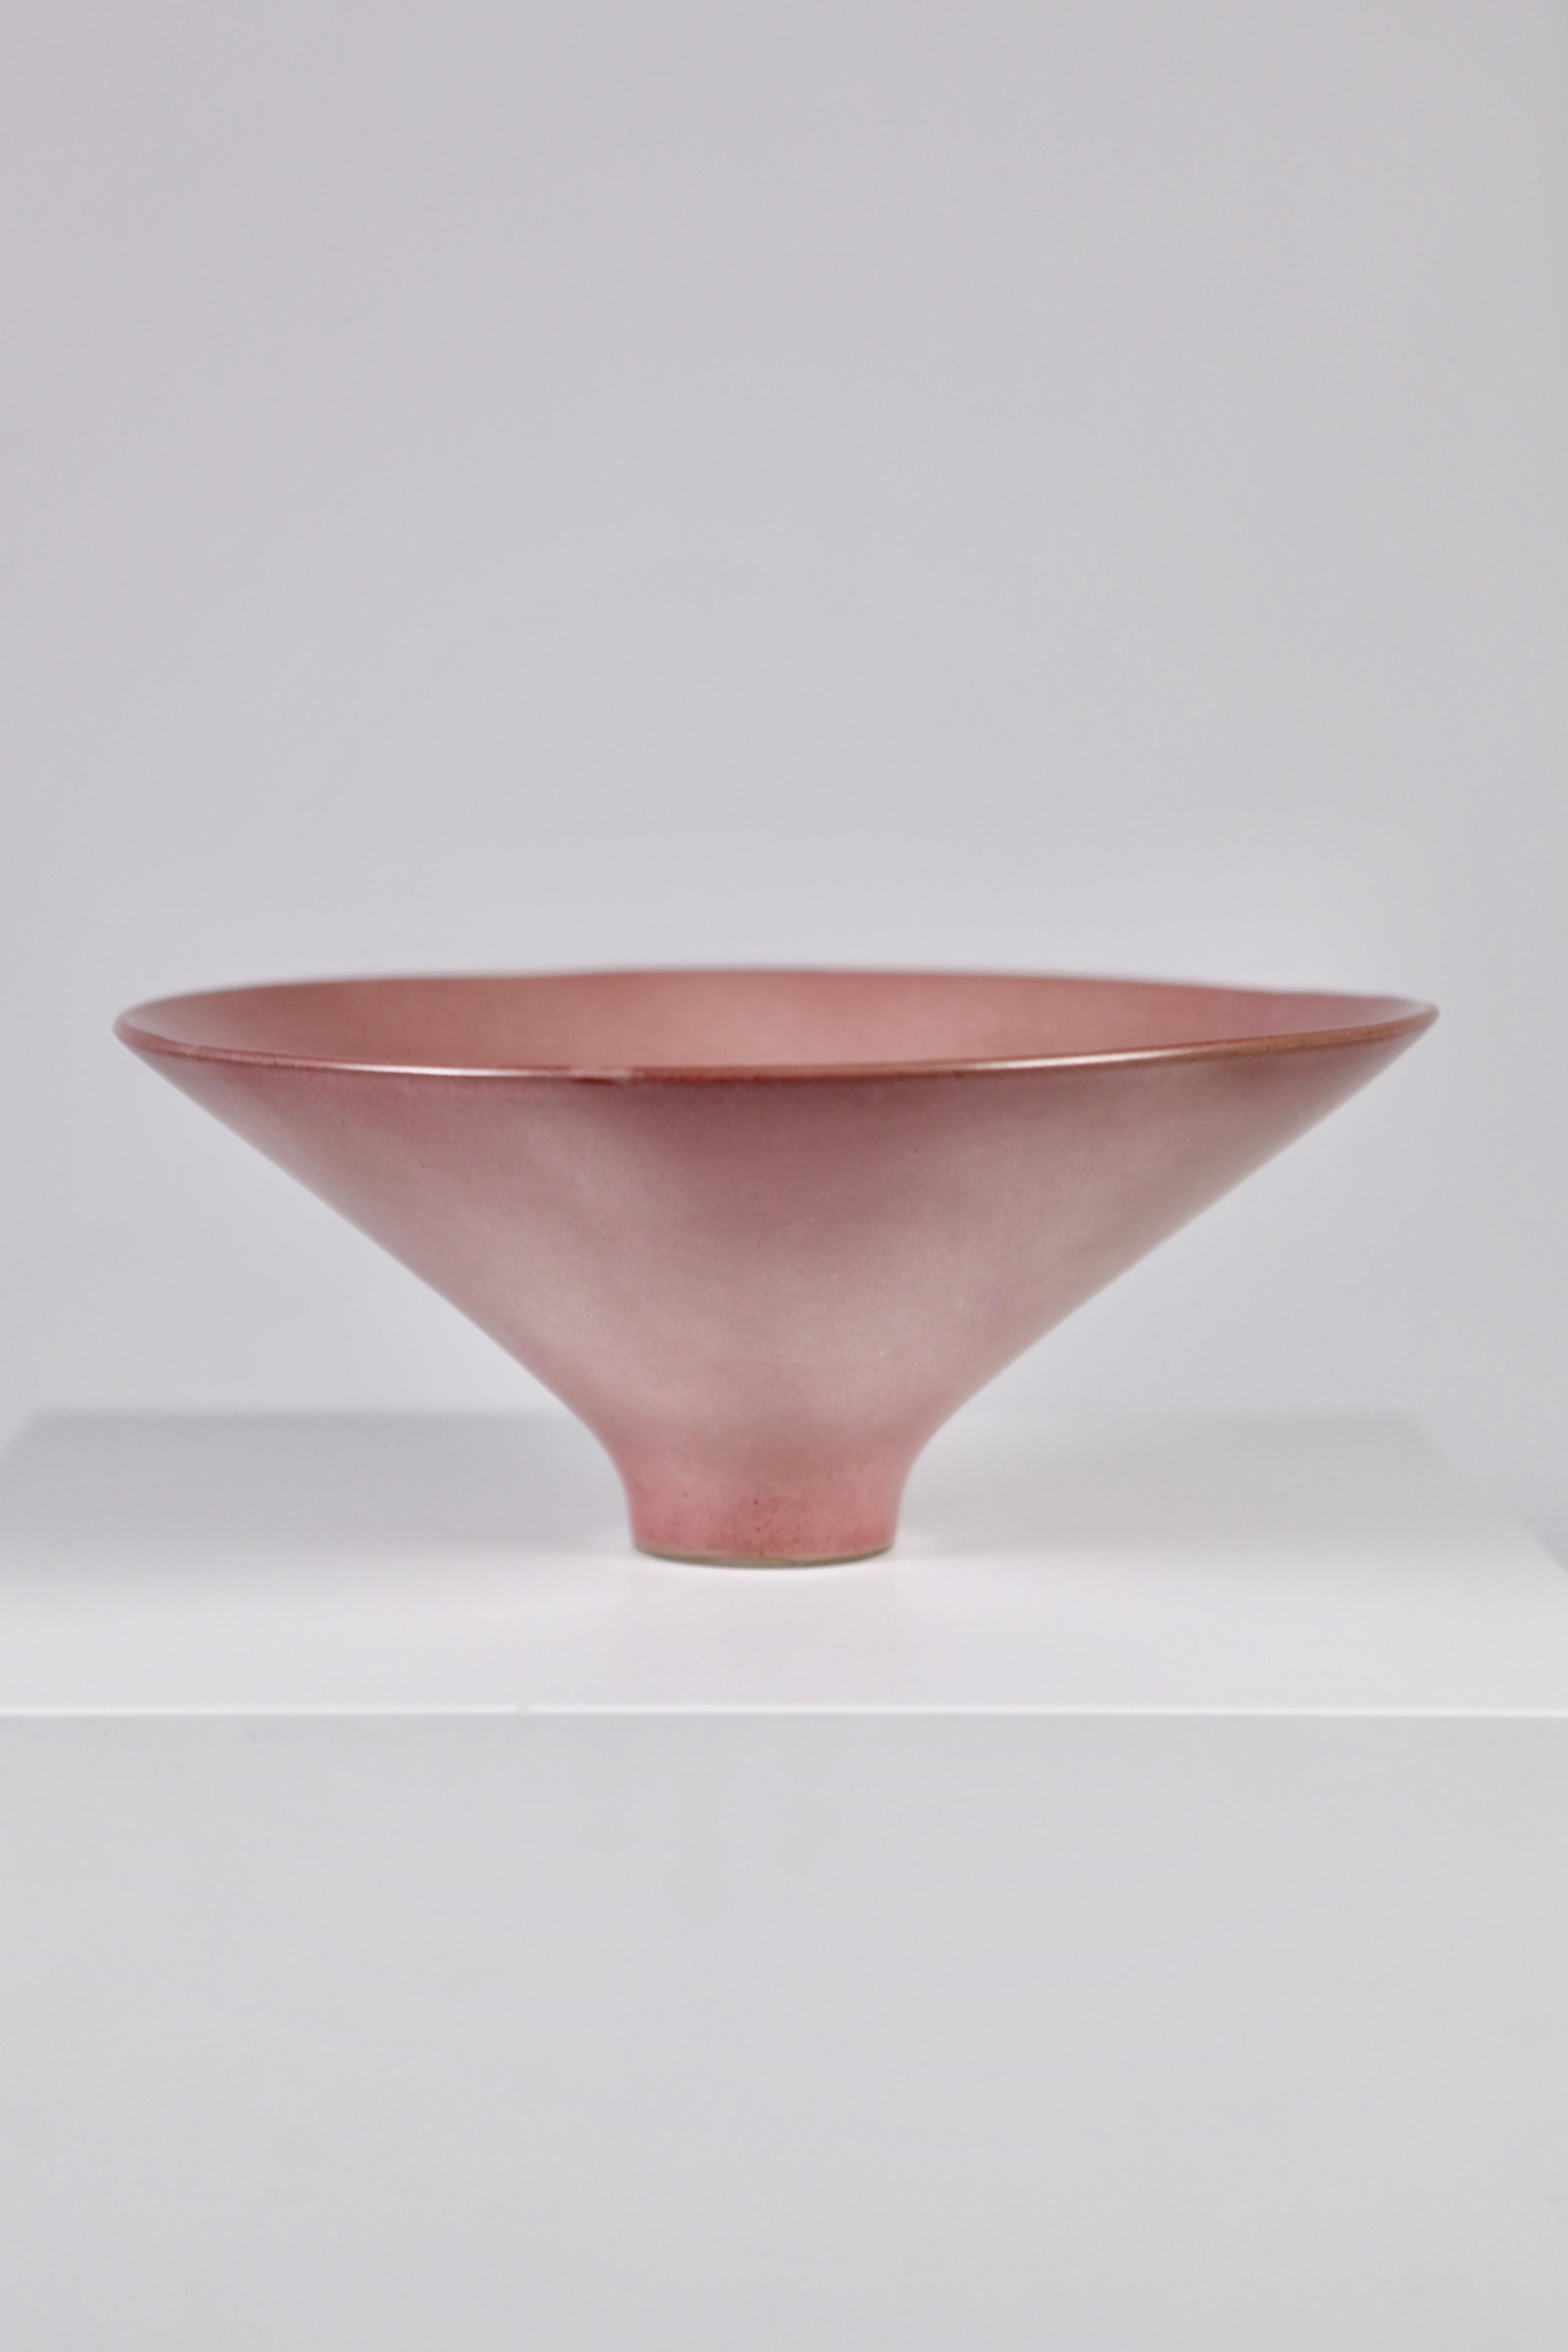 Jacques & Dani Ruelland, large glazed ceramic bowl or centerpiece in polychrome Lilac, executed in their workshop. Underside with artist´s signature 